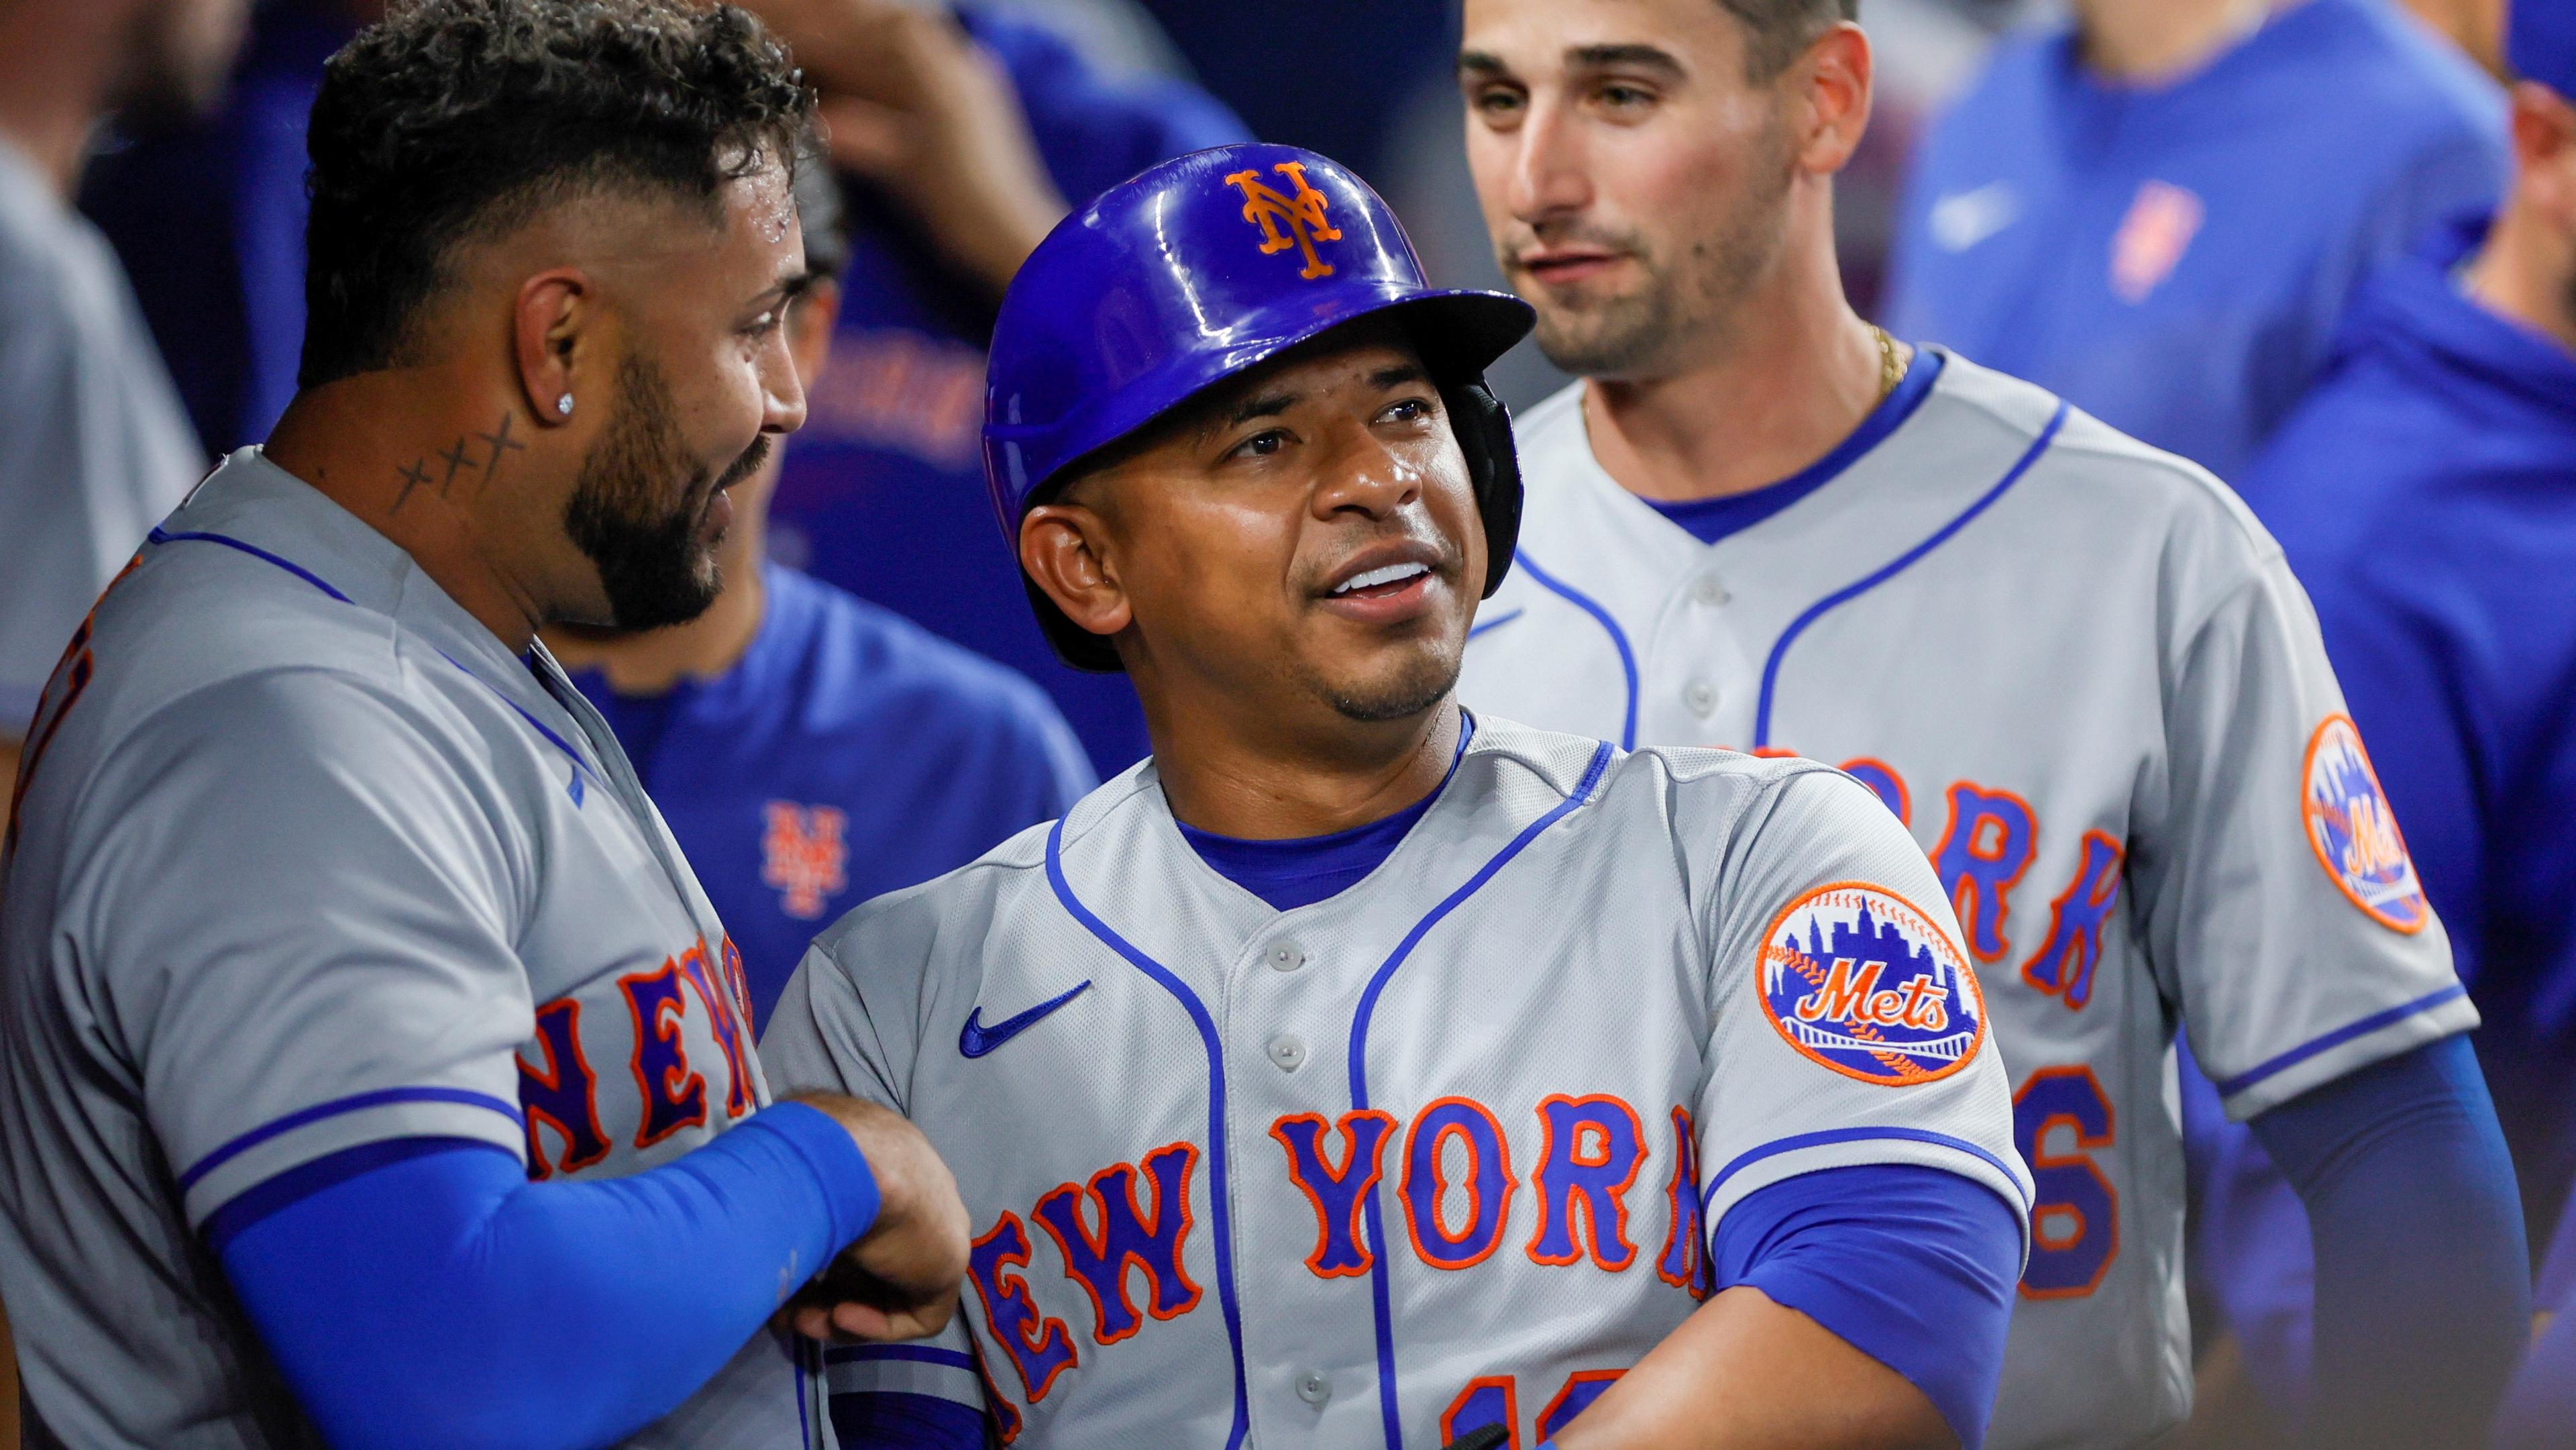 Mar 30, 2023; Miami, Florida, USA; New York Mets third baseman Eduardo Escobar (10) and catcher Omar Narvaez (2) celebrate in the dugout after scoring during the seventh inning against the Miami Marlins at loanDepot Park. Mandatory Credit: Sam Navarro-USA TODAY Sports / © Sam Navarro-USA TODAY Sports